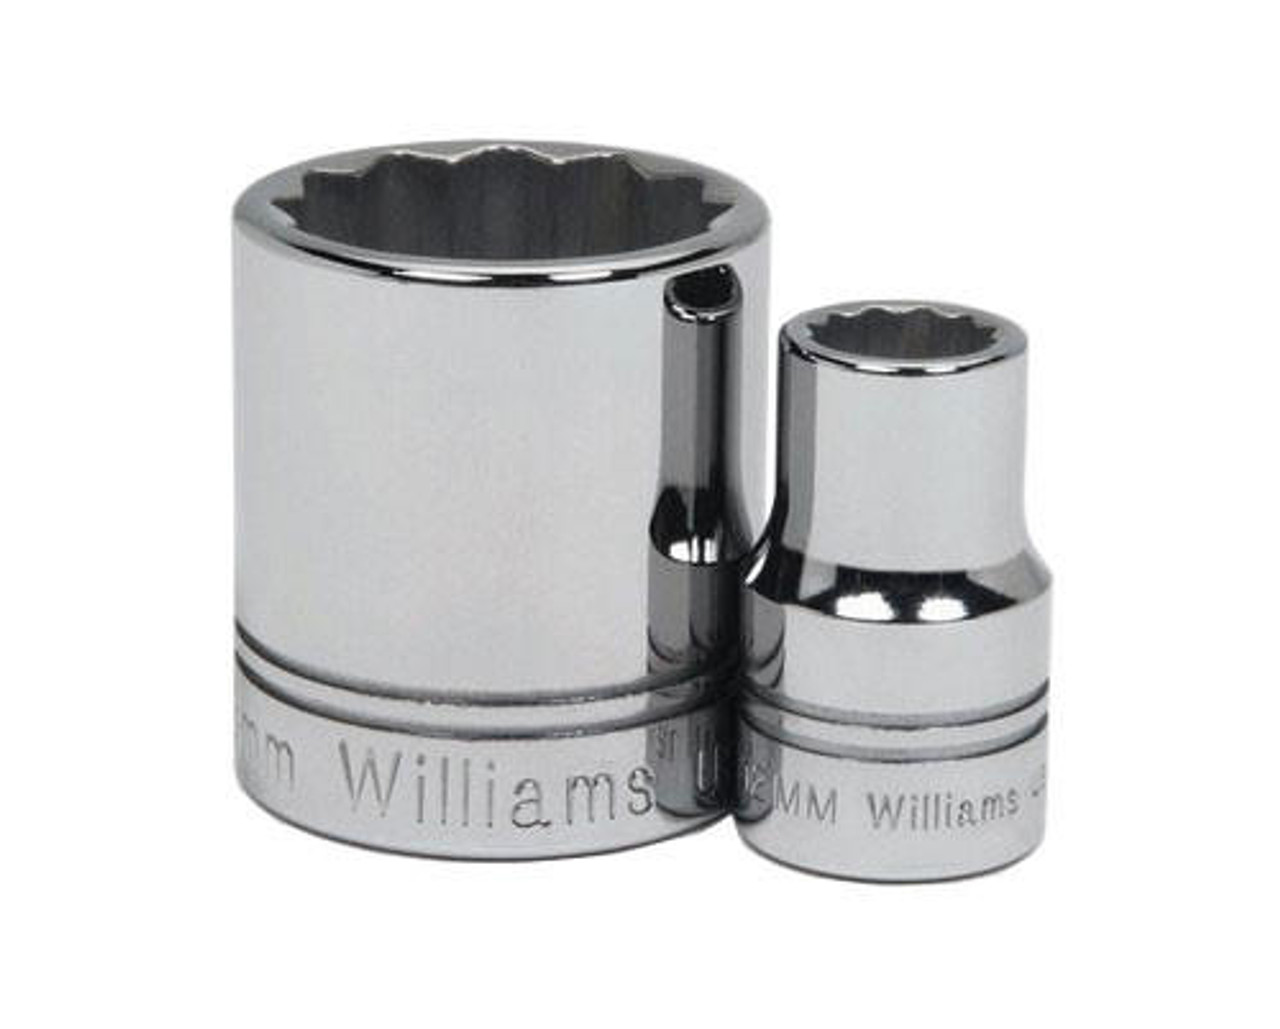 Williams Made In USA 19MM Williams 1/2" Dr Shallow Socket 12 Pt - STM-1219 